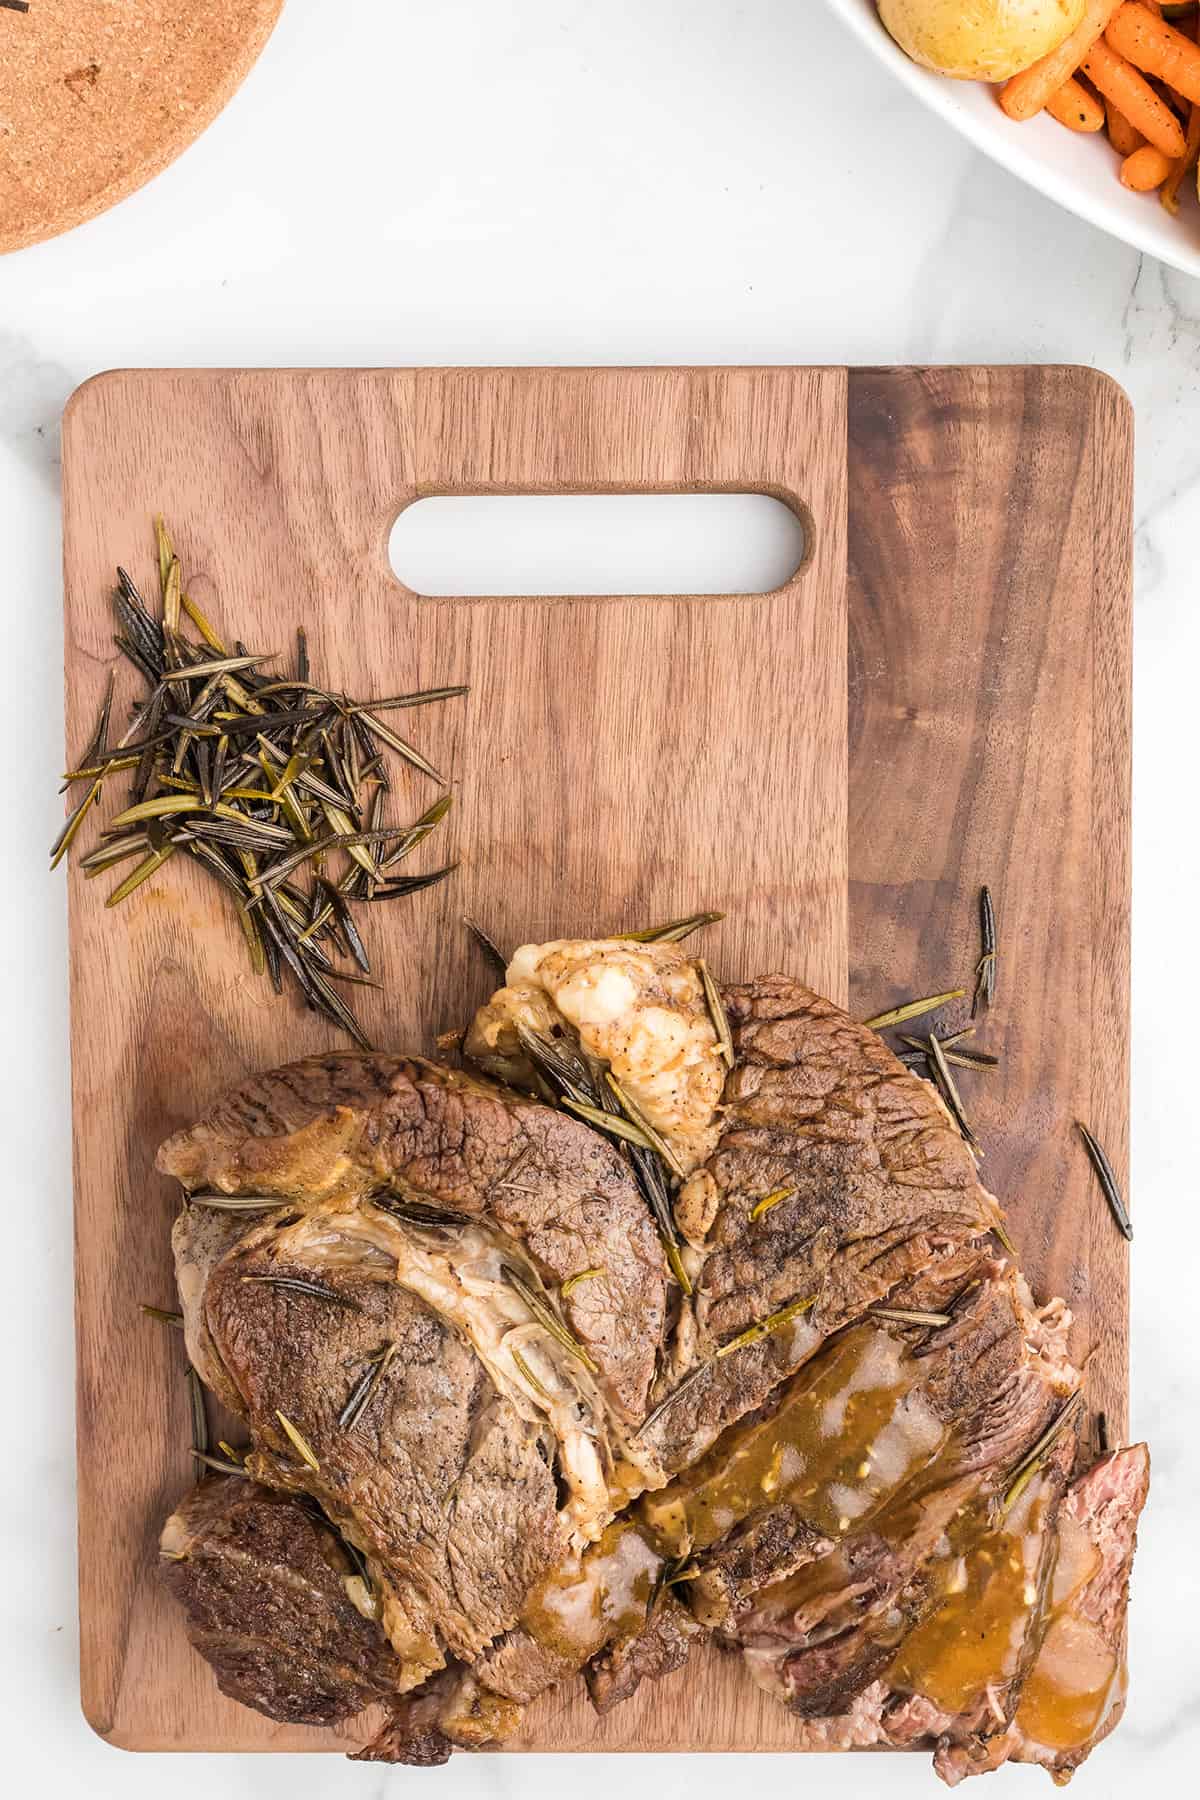 Cooked, sliced roast on a wooden board.